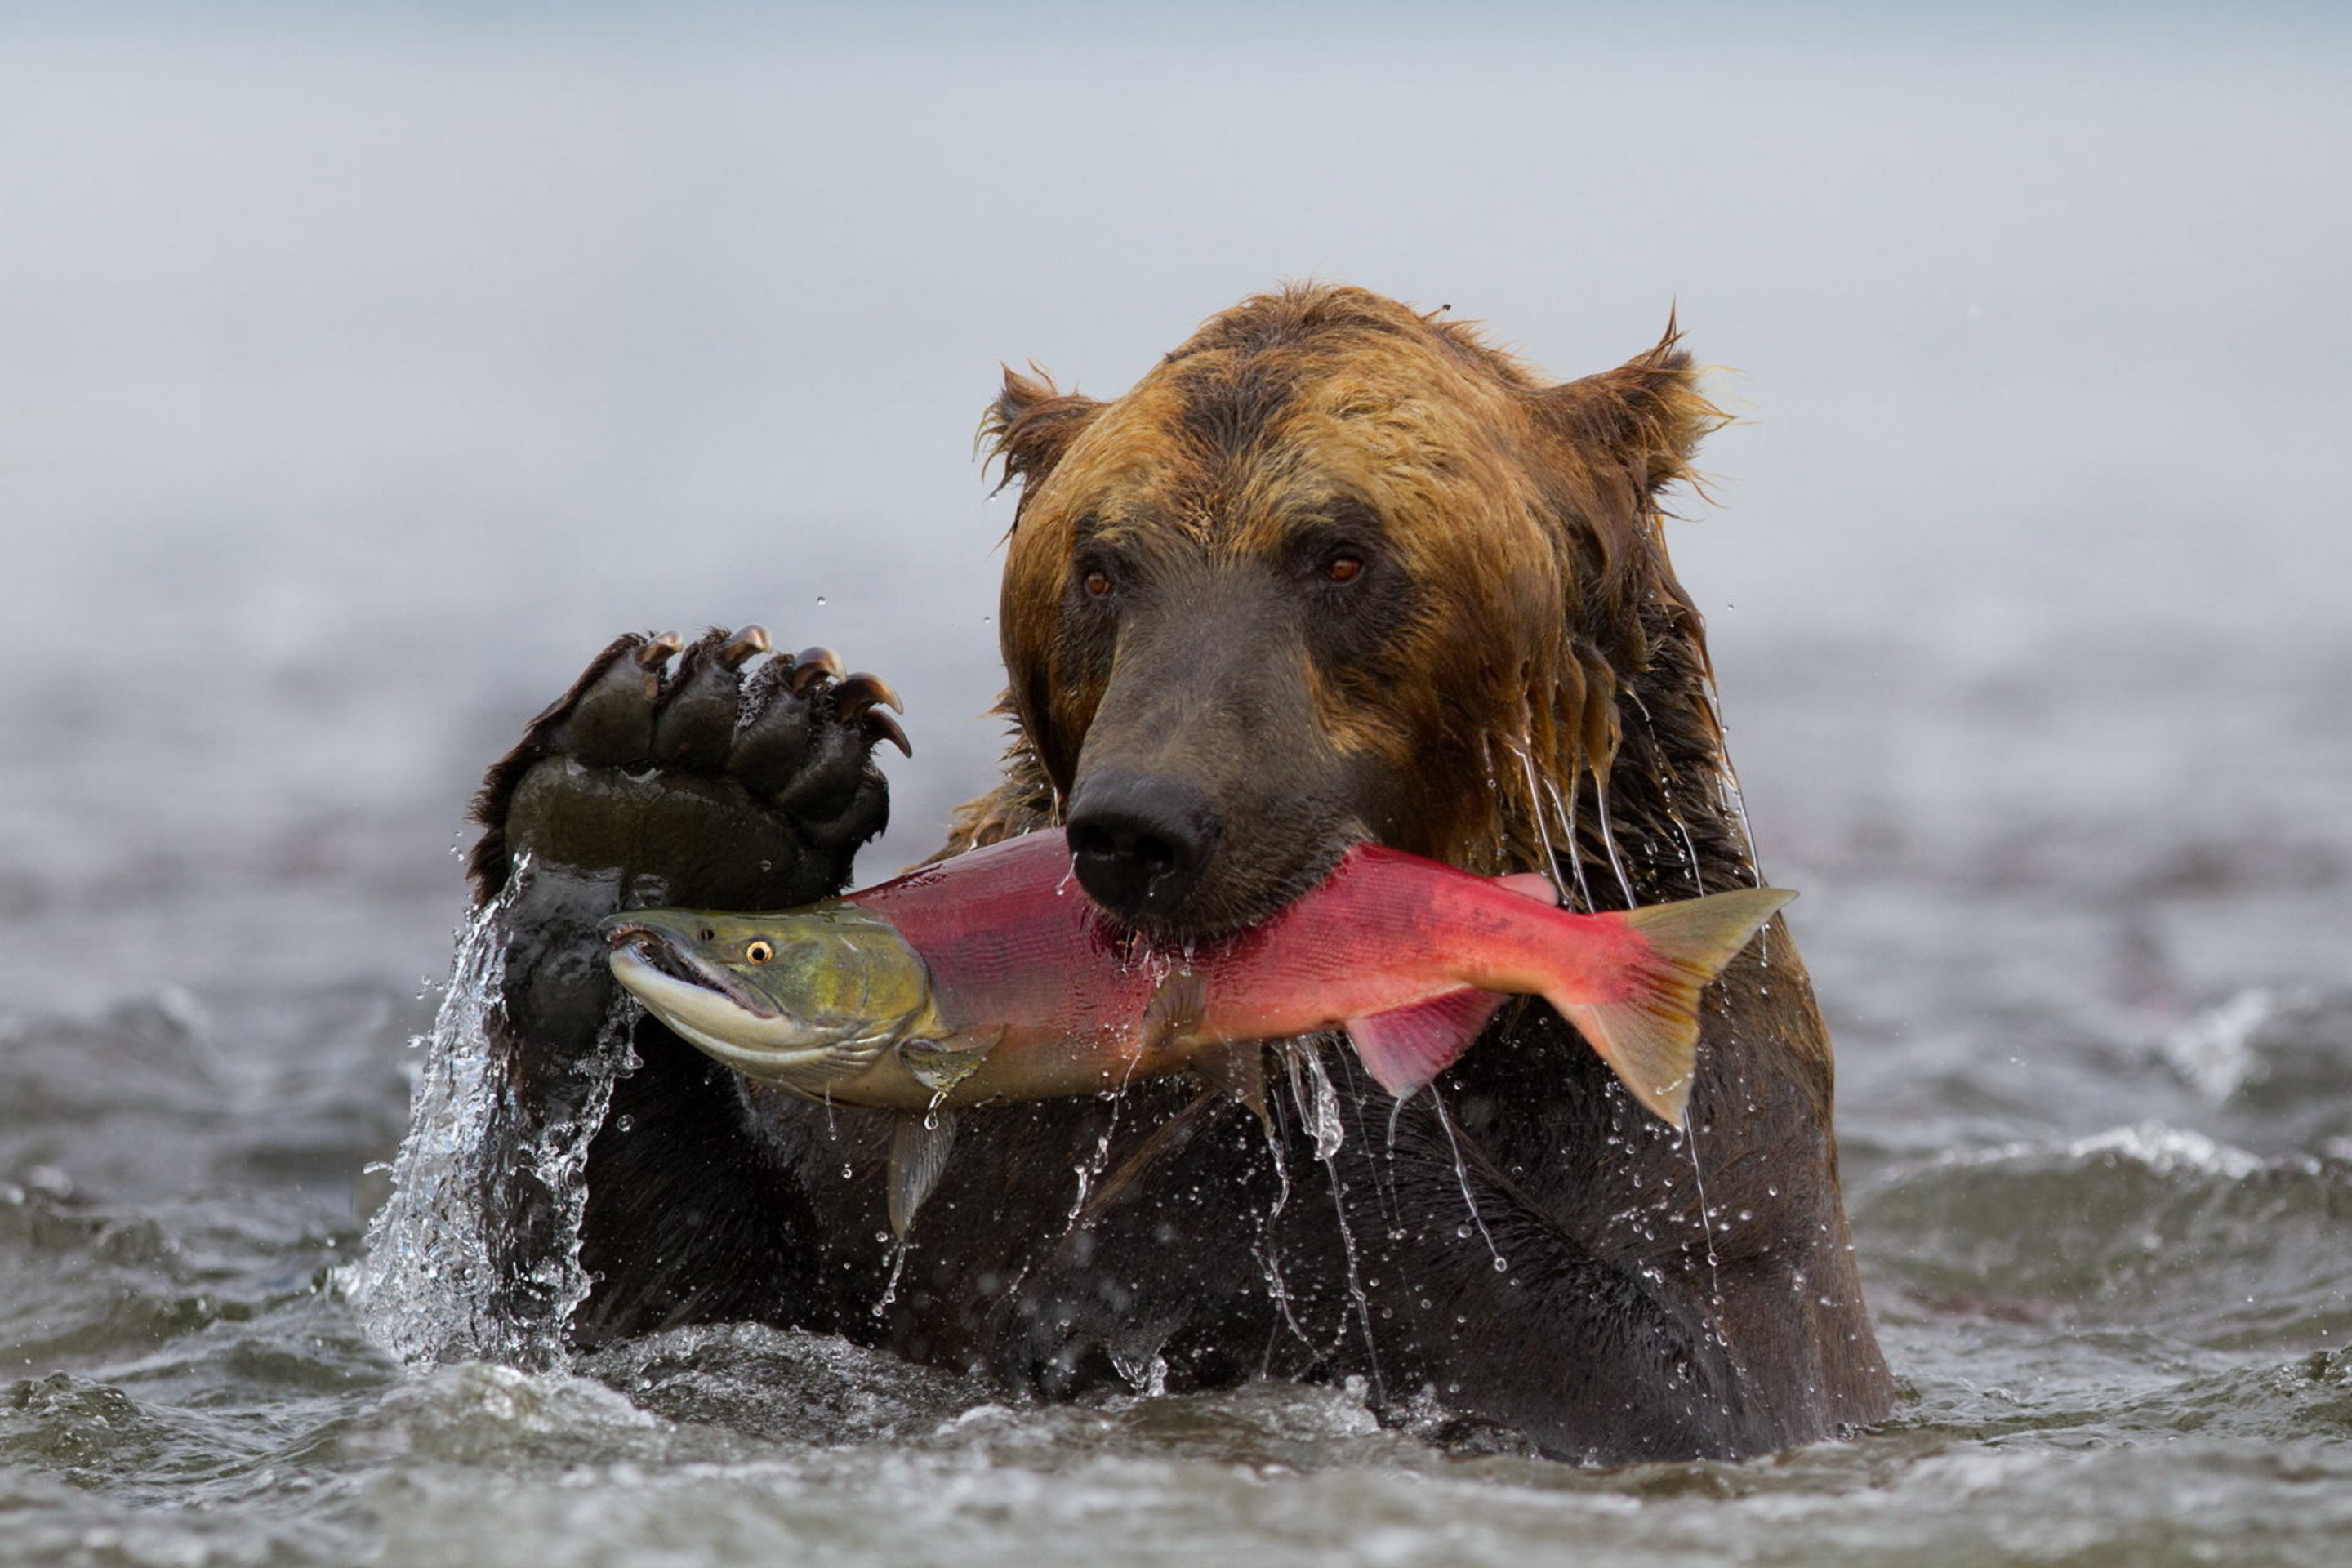 Grizzly Bear Catching Fish wallpaper 2880x1920